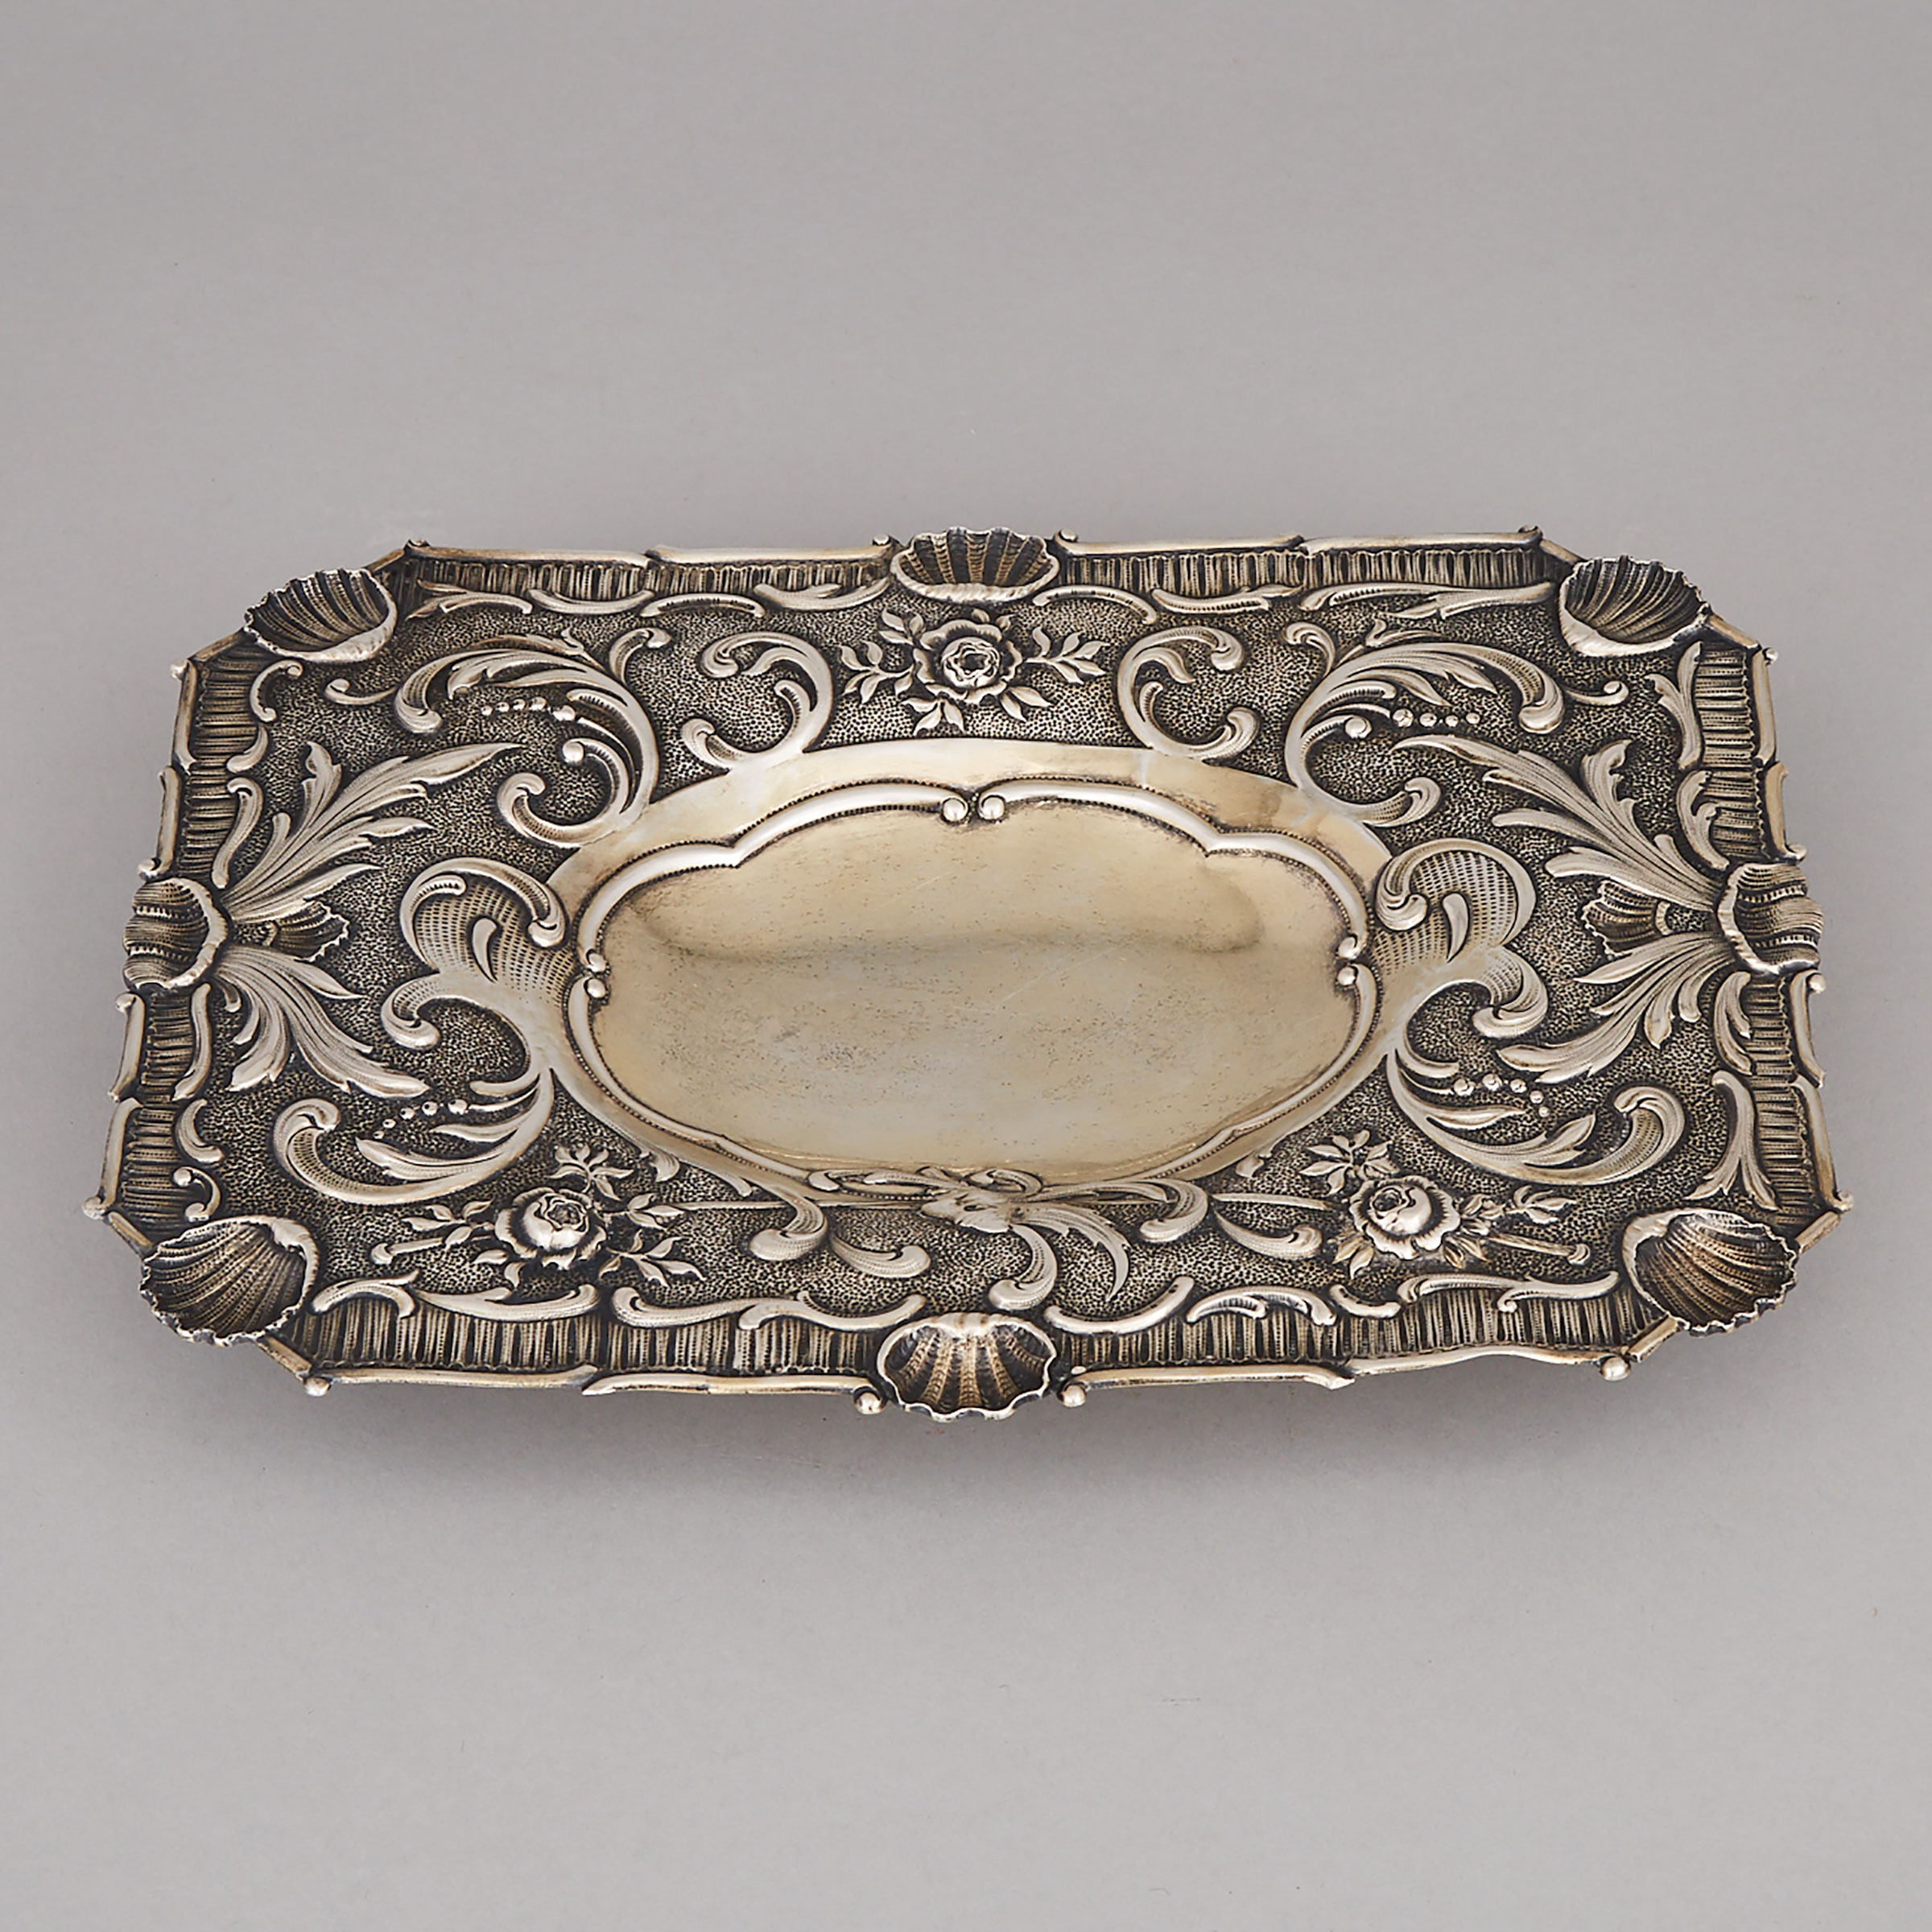 Continental Silver Repoussé Oblong Dish, early 20th century